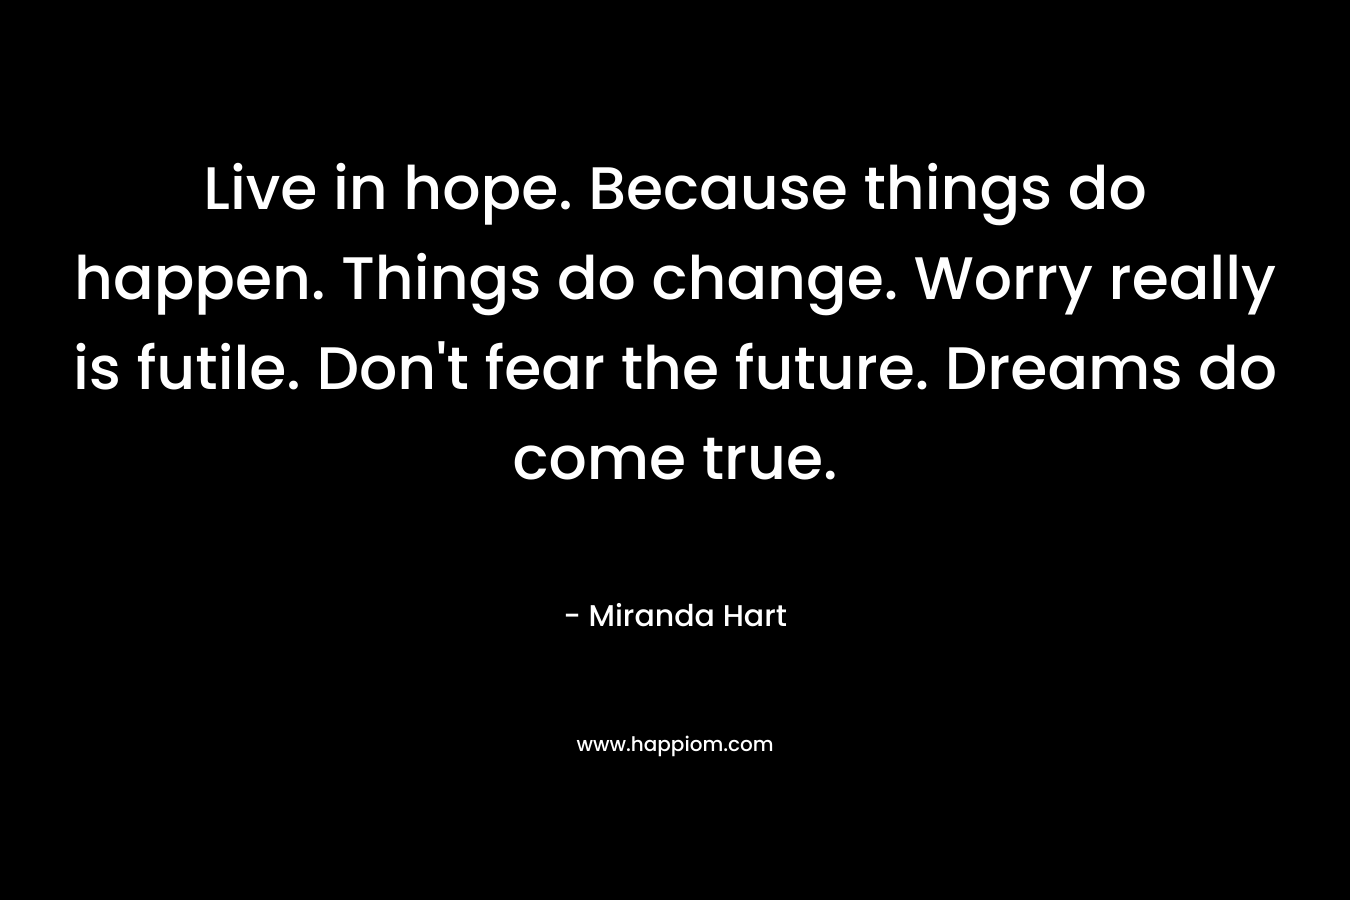 Live in hope. Because things do happen. Things do change. Worry really is futile. Don't fear the future. Dreams do come true.